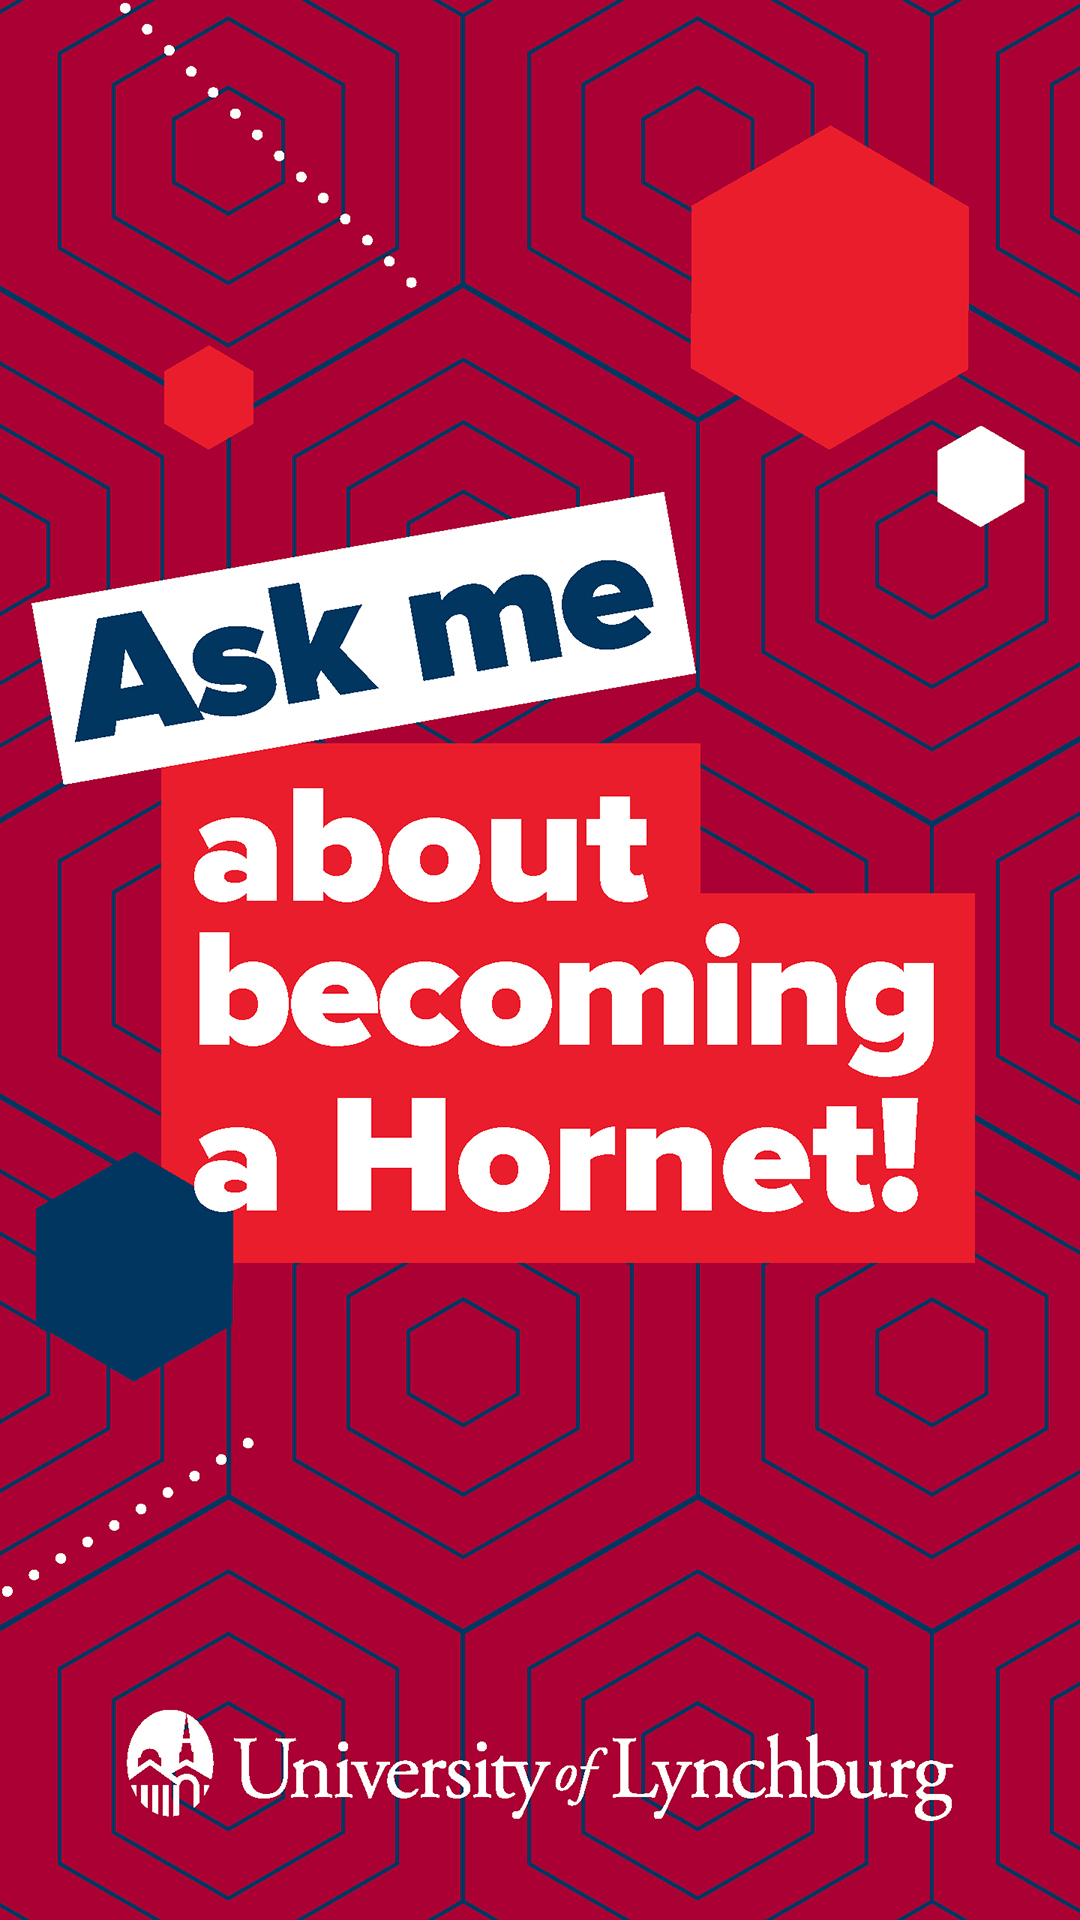 Ask me about becoming a Hornet!